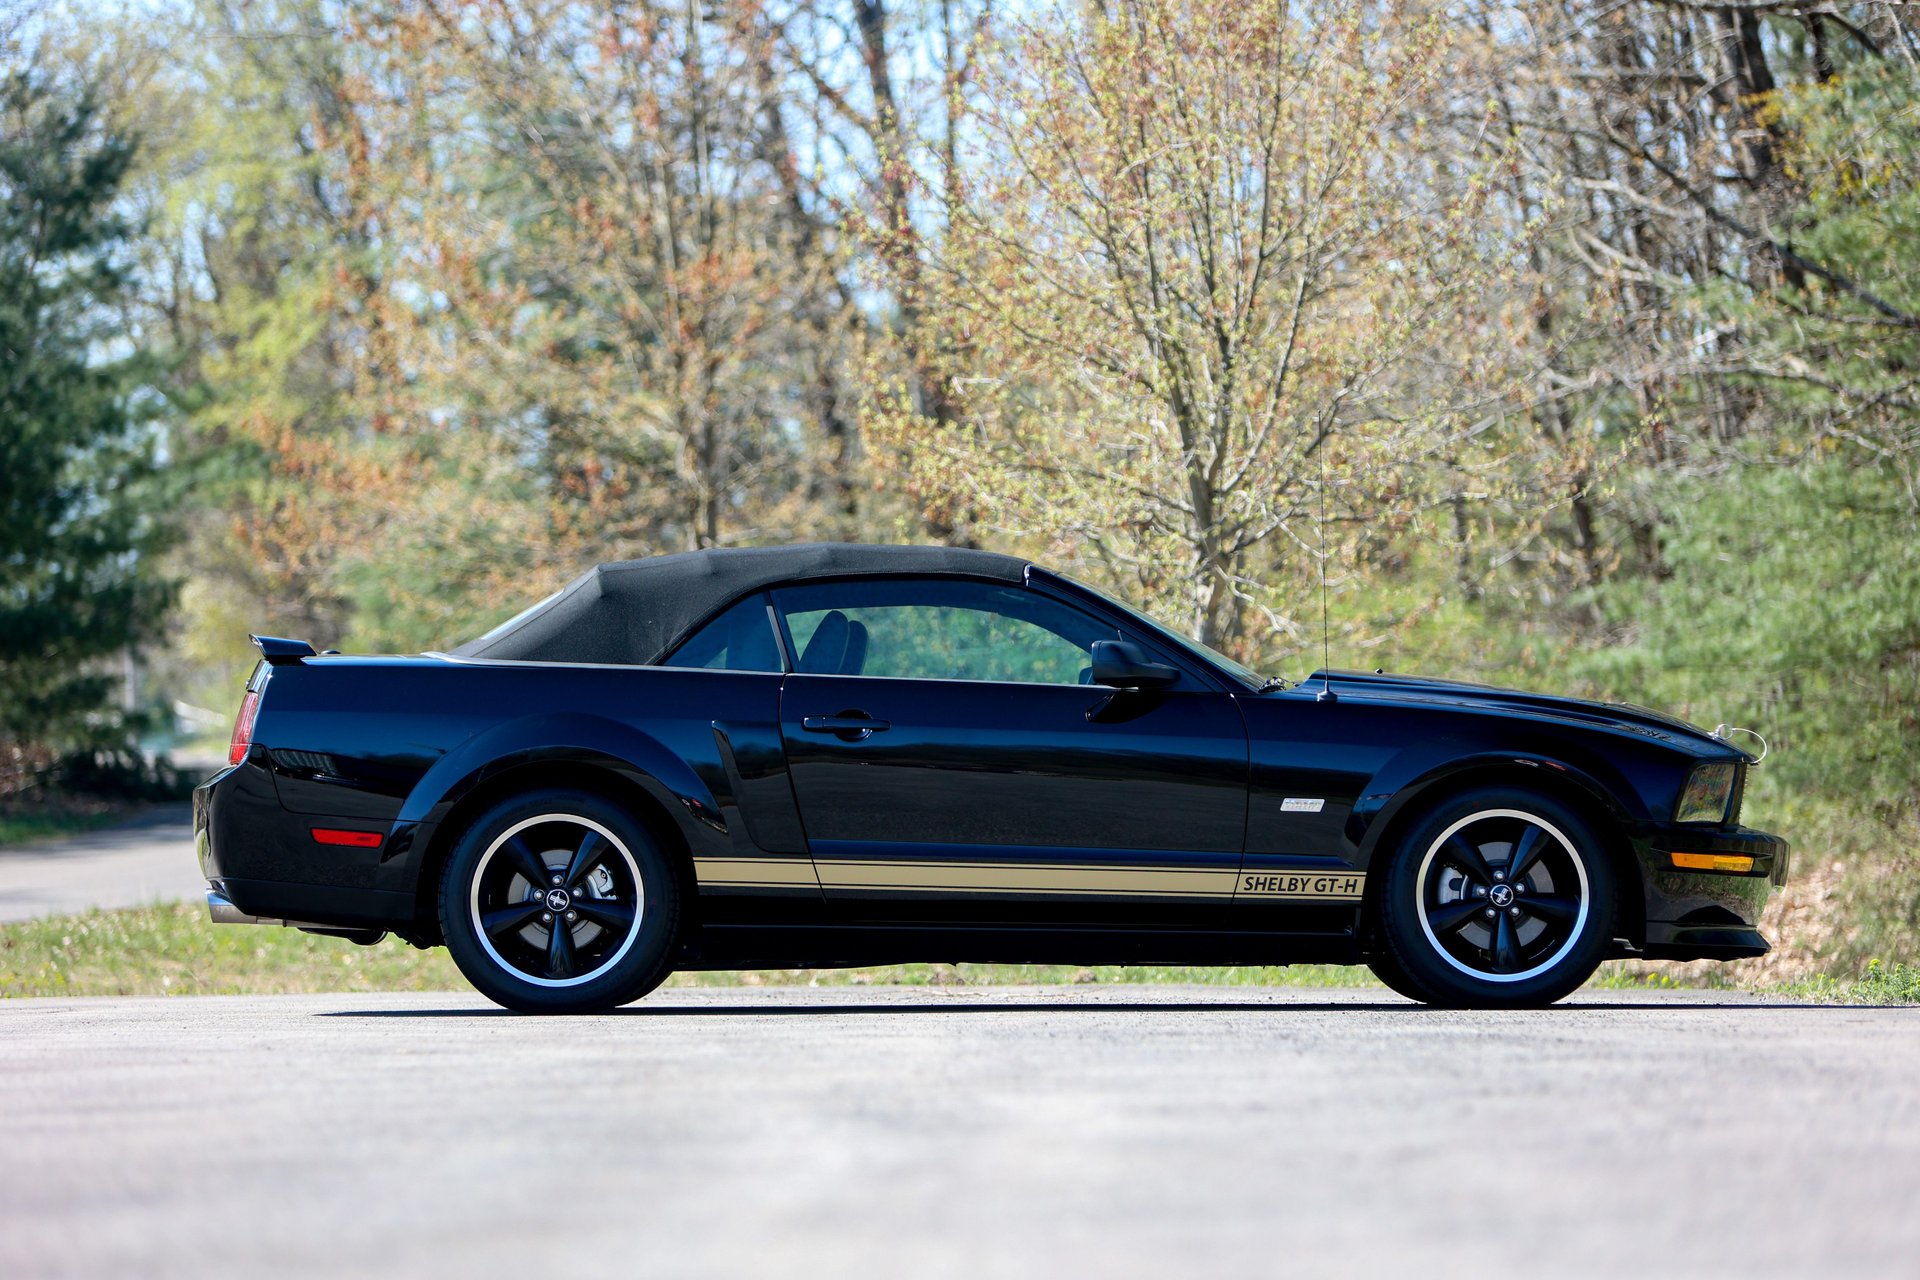 For Sale 2007 Ford Shelby Mustang GT-H Convertible 'Executive Car'